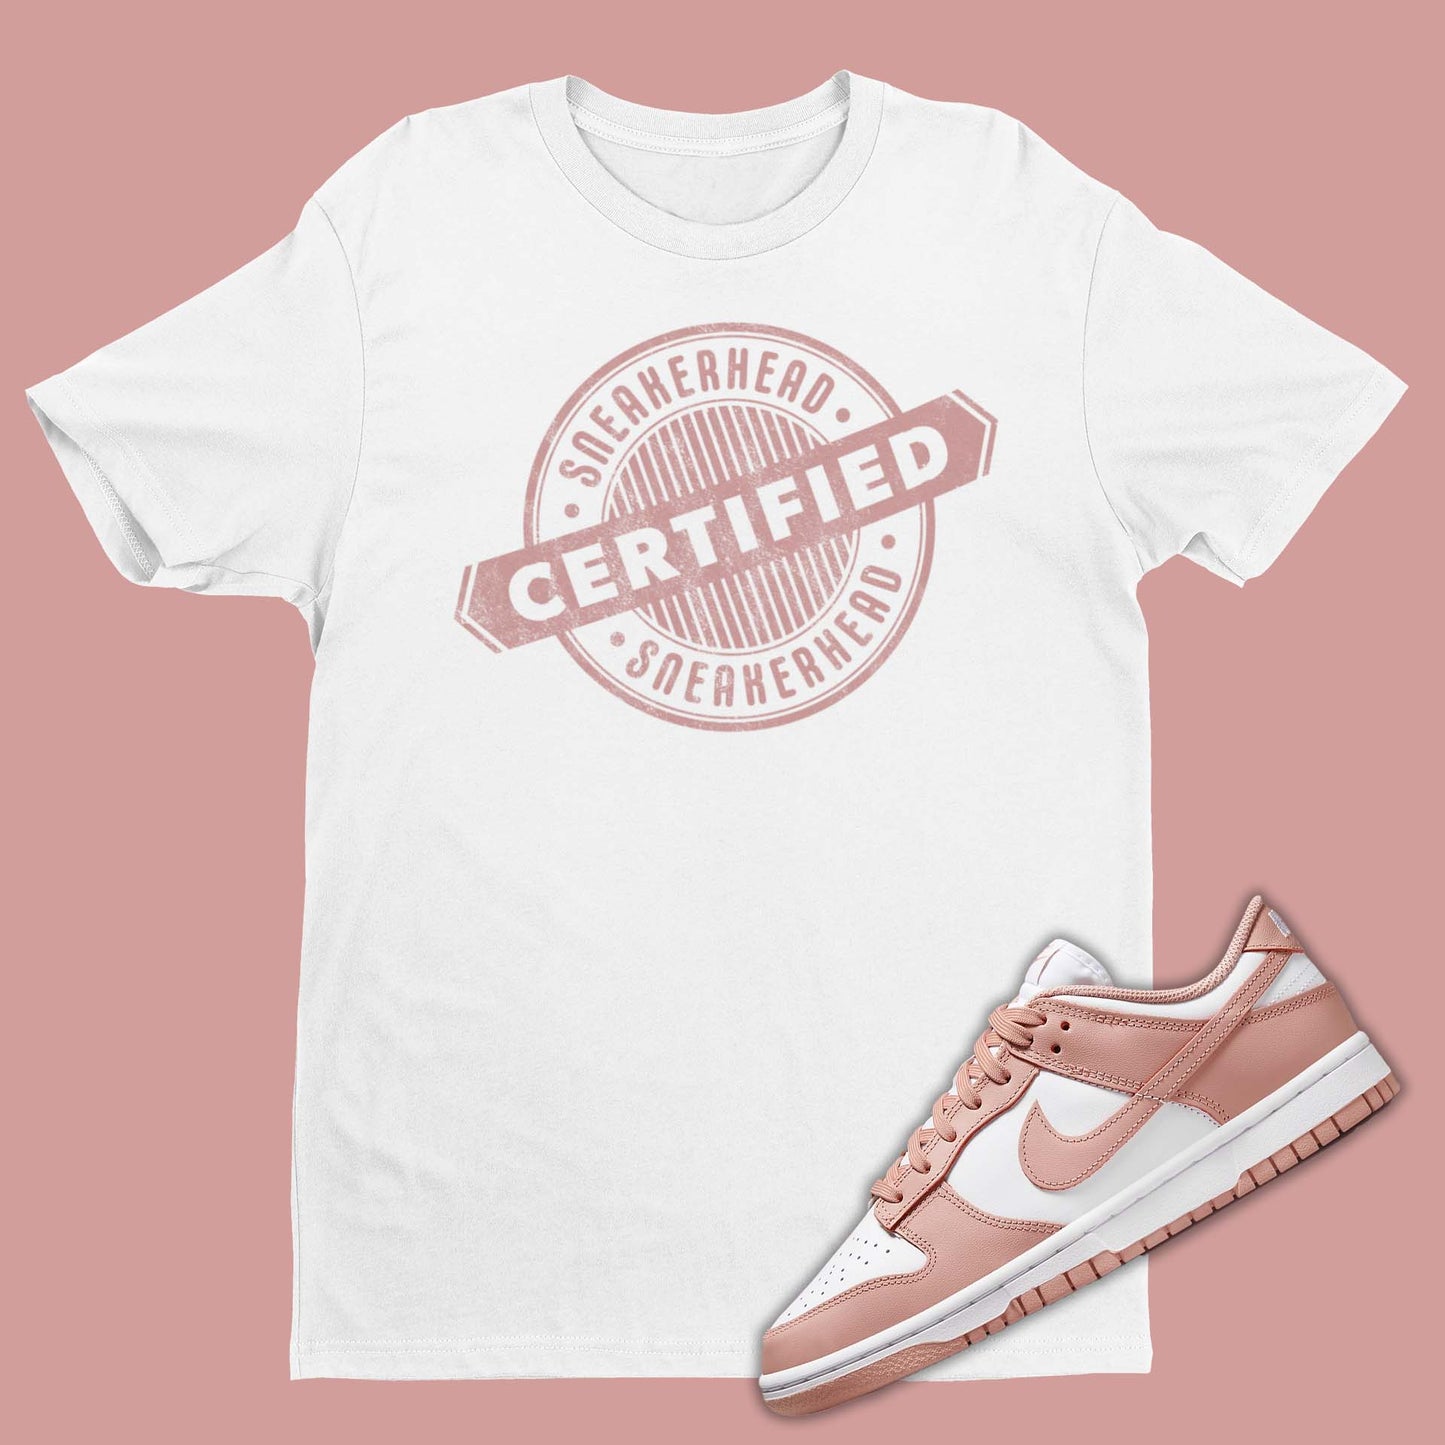 The perfect shirt to match your Nike Dunk Rose Whisper sneakers! Our Match Rose Whisper Dunks t-shirt is made to compliment your kicks. Bring your sneakers to the next level with this Dunk Rose Whisper shirt. Match and feel trendy with this graphic tee! Certified Sneakerhead stamp print on front.